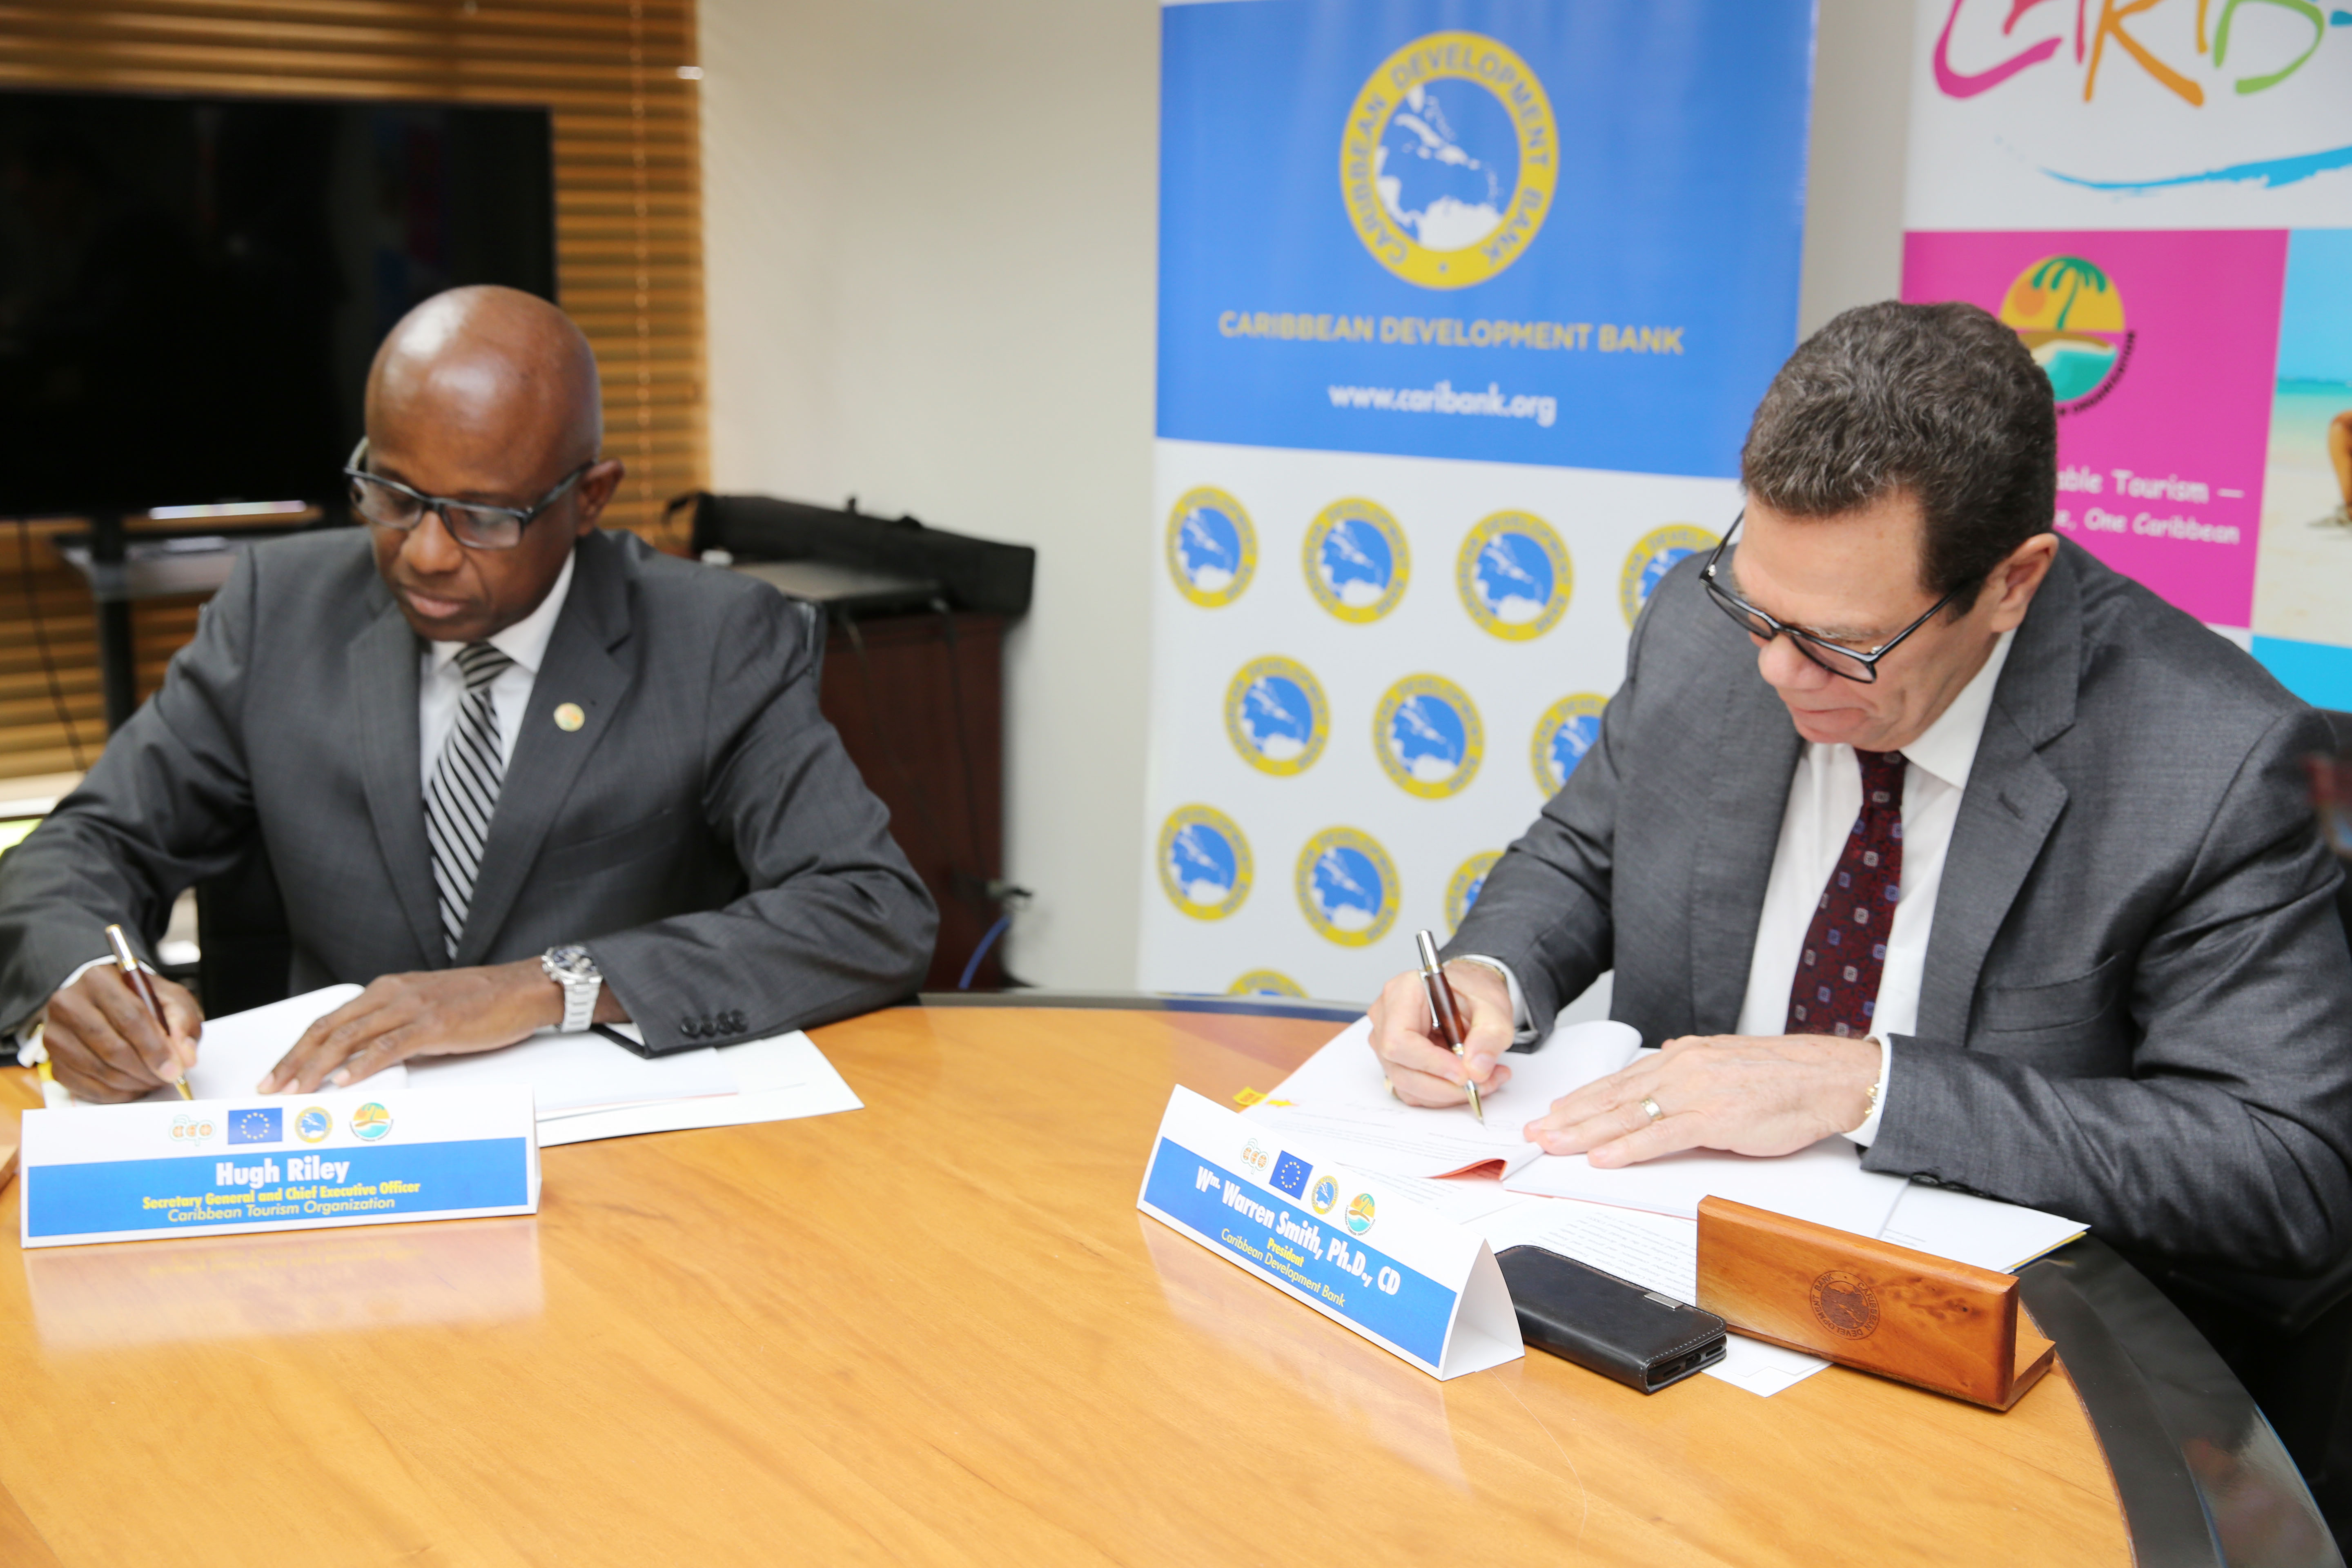 Hugh Riley, Secretary General, CTO (left) and Dr. Wm. Warren Smith, President, CDB (right) sign the agreement for the project, which aims to increase the Caribbean tourism sector’s resilience to natural hazards and climate related risks.